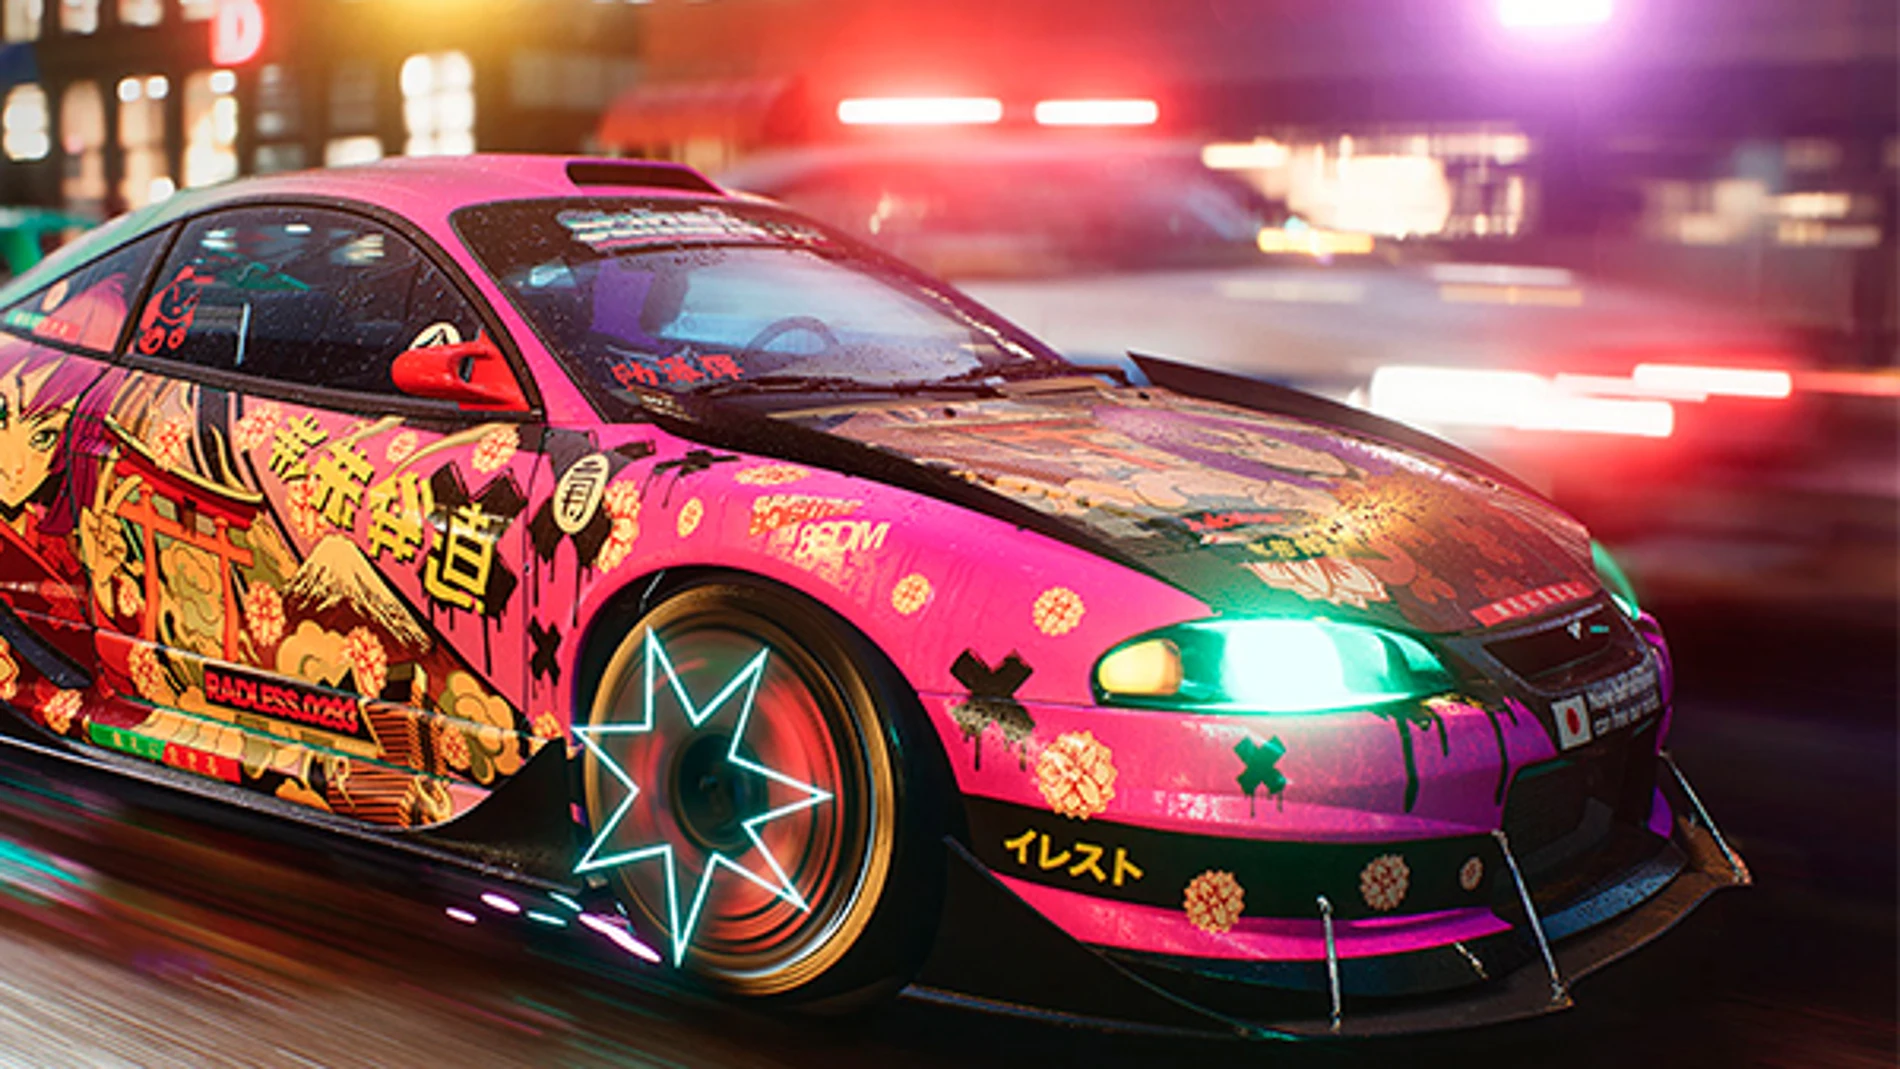 “Need for Speed Unbound”.